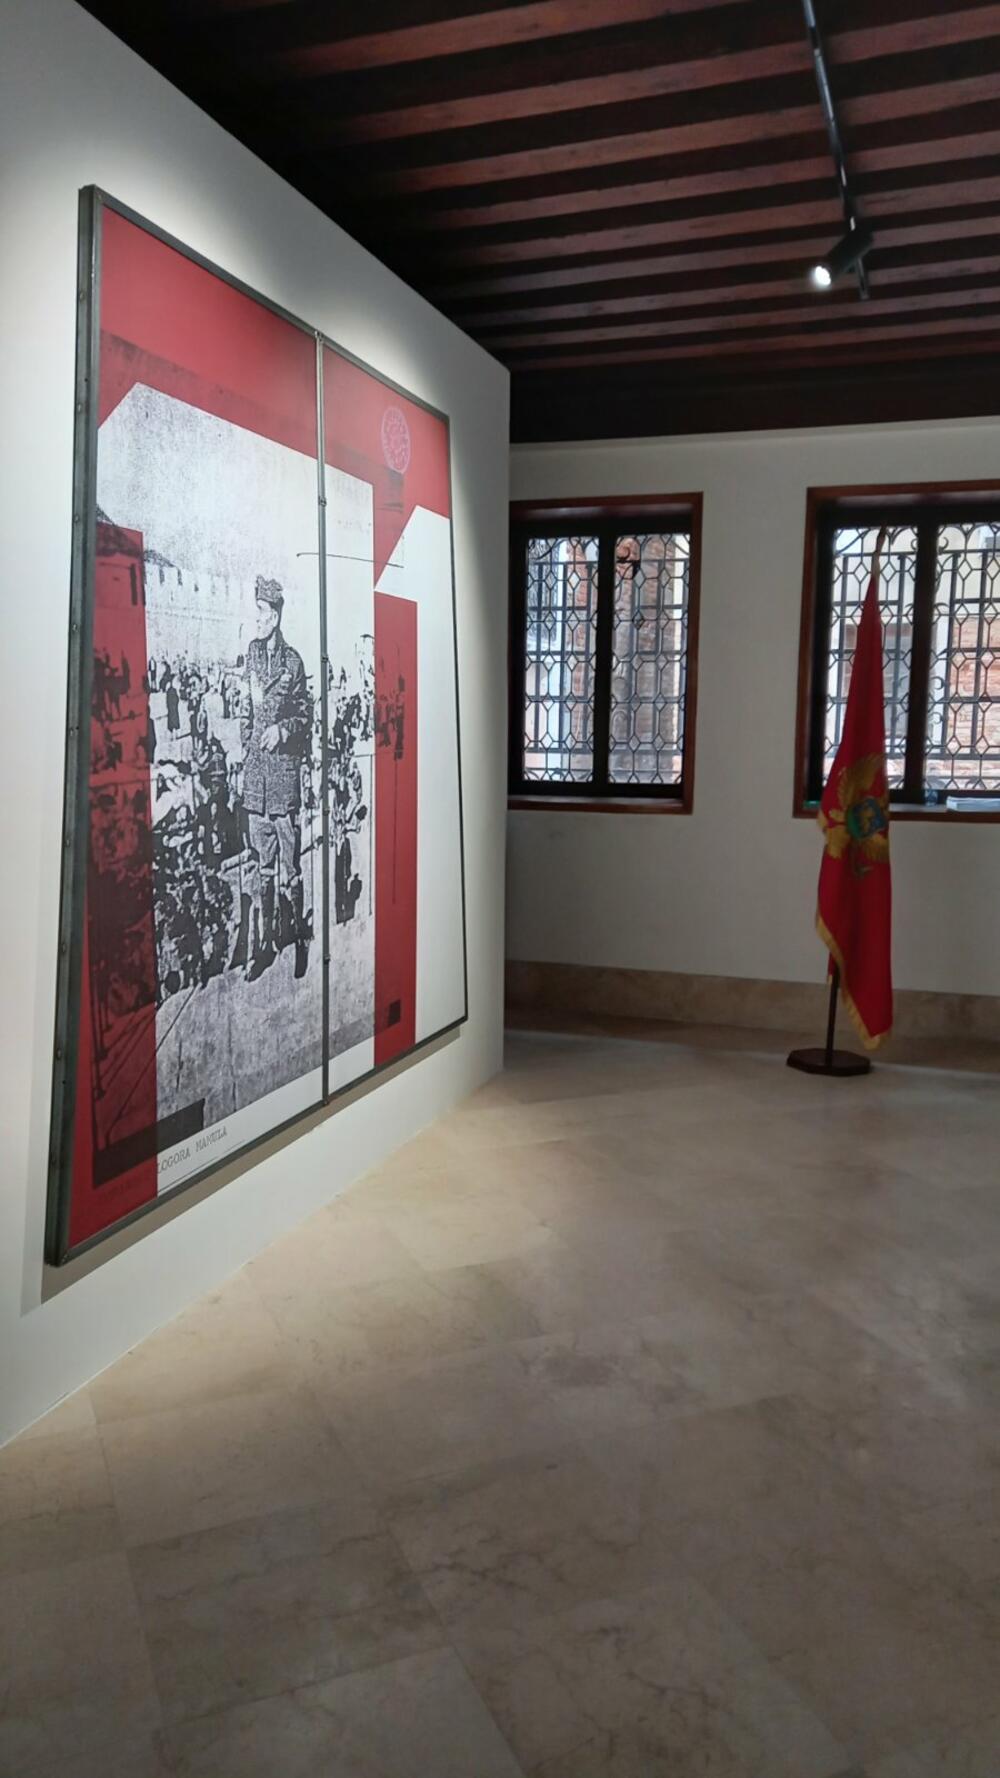 Opening of the Montenegrin pavilion at the Biennale in Venice